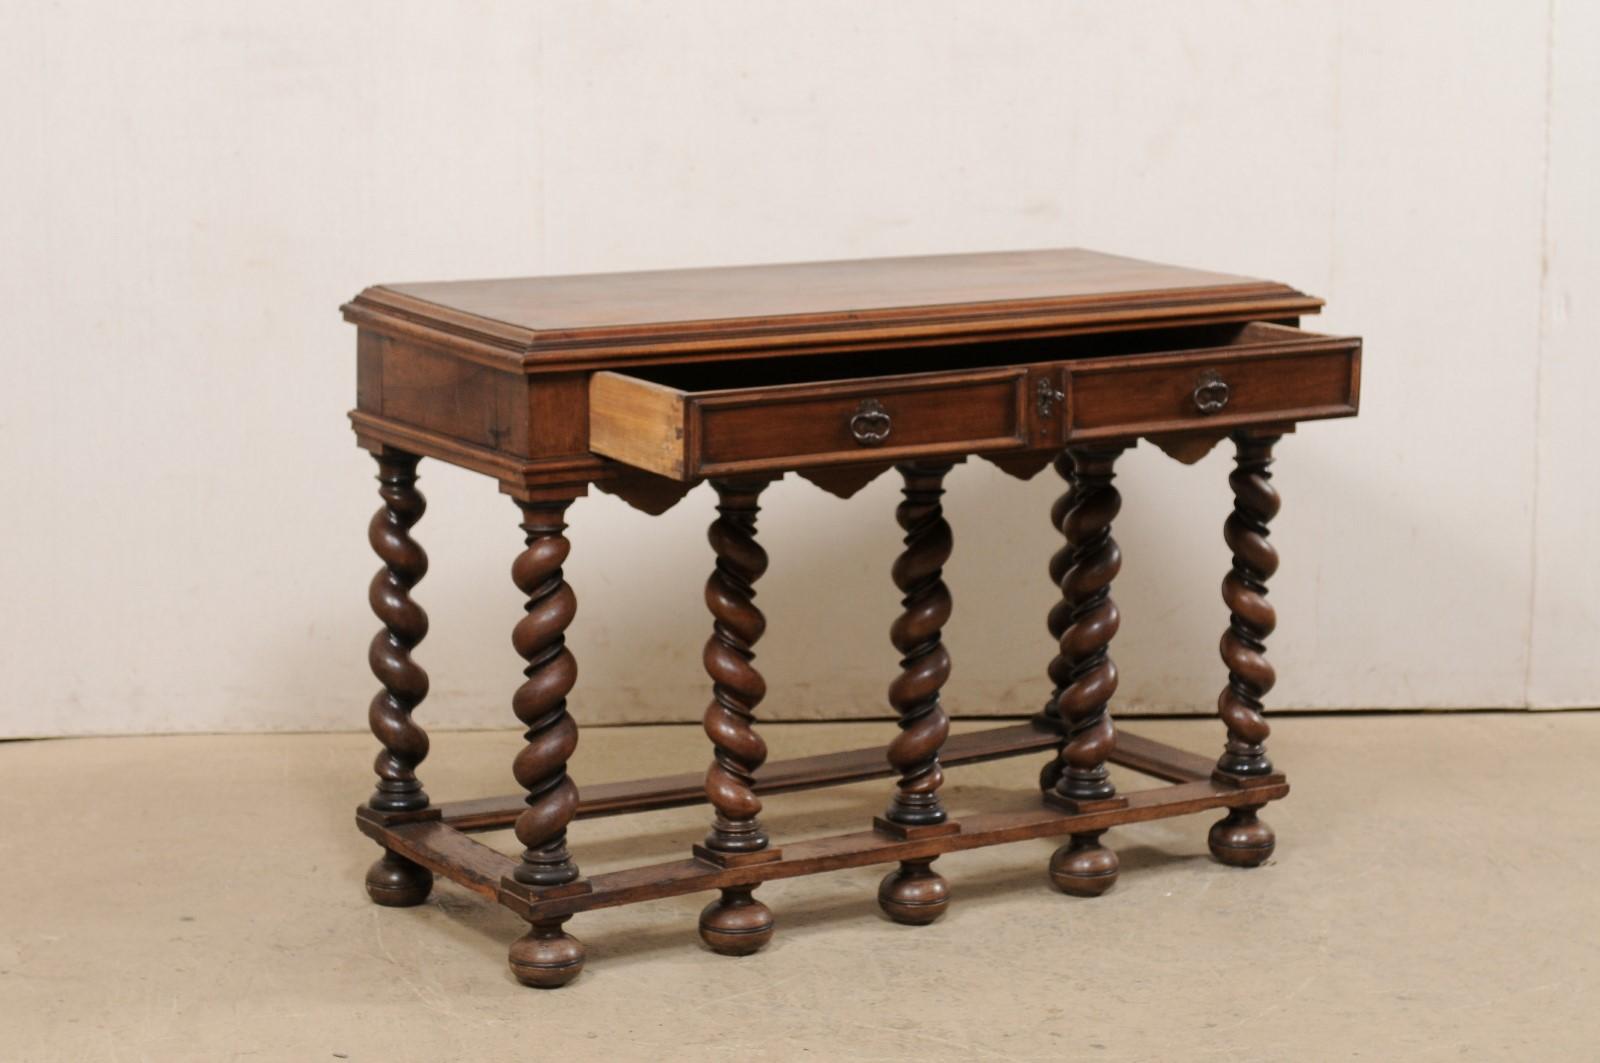 An English wood table with barley twist legs from the early 20th century. This antique table from England features an elongated rectangular top, which rests atop an apron that houses a pair of panel-front drawers at one side, and is beautifully